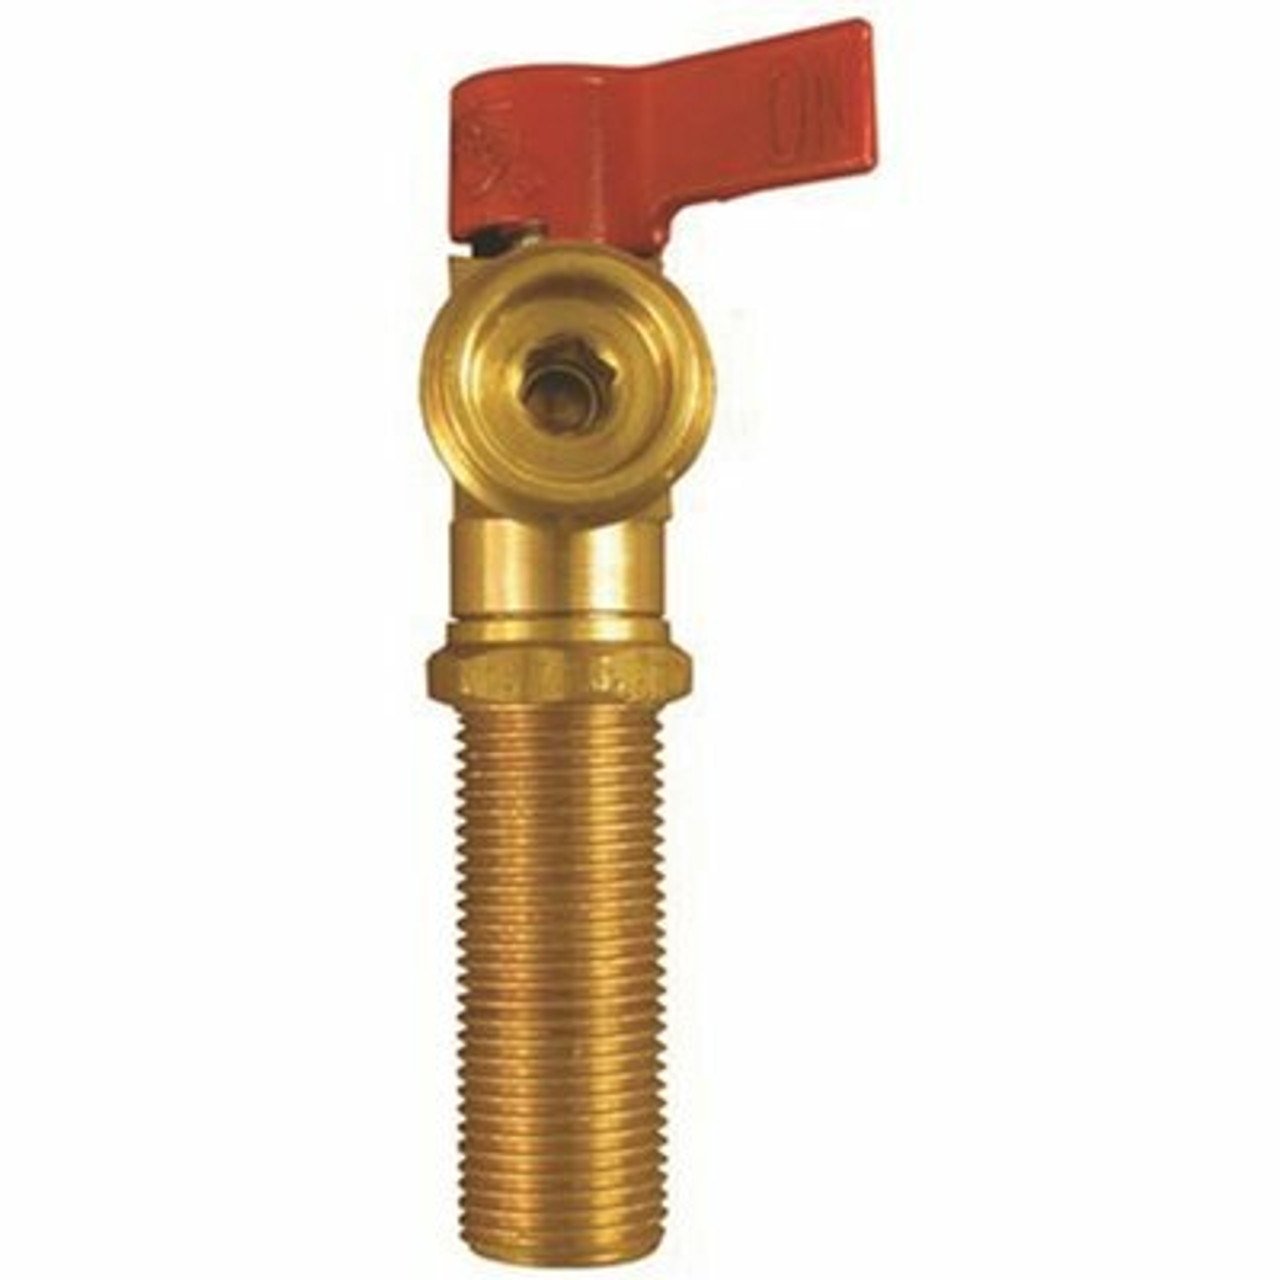 Ips Corporation Washer Outlet Box Valve, 1/2 In. Sweat Red Handle